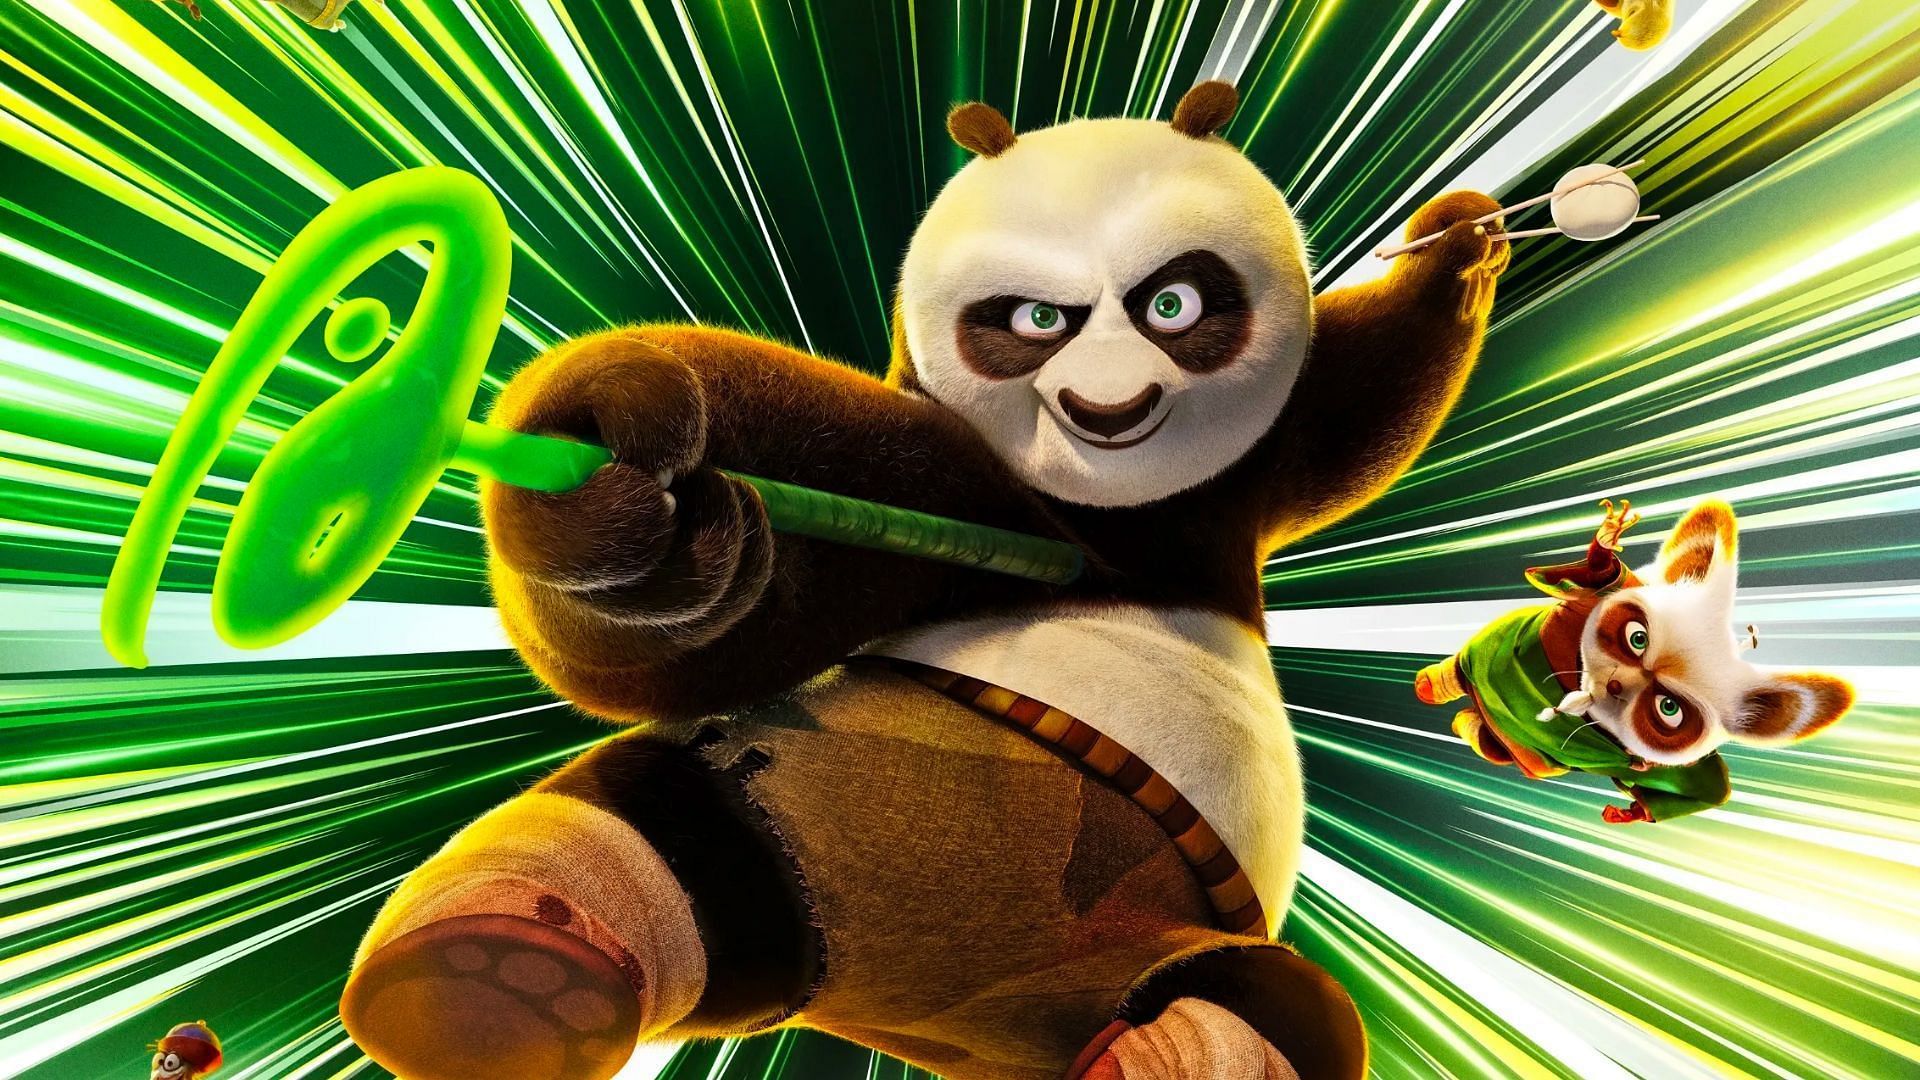 The Kung Fu Panda 4 trailer is filled with Easter eggs (Image via Universal Pictures)